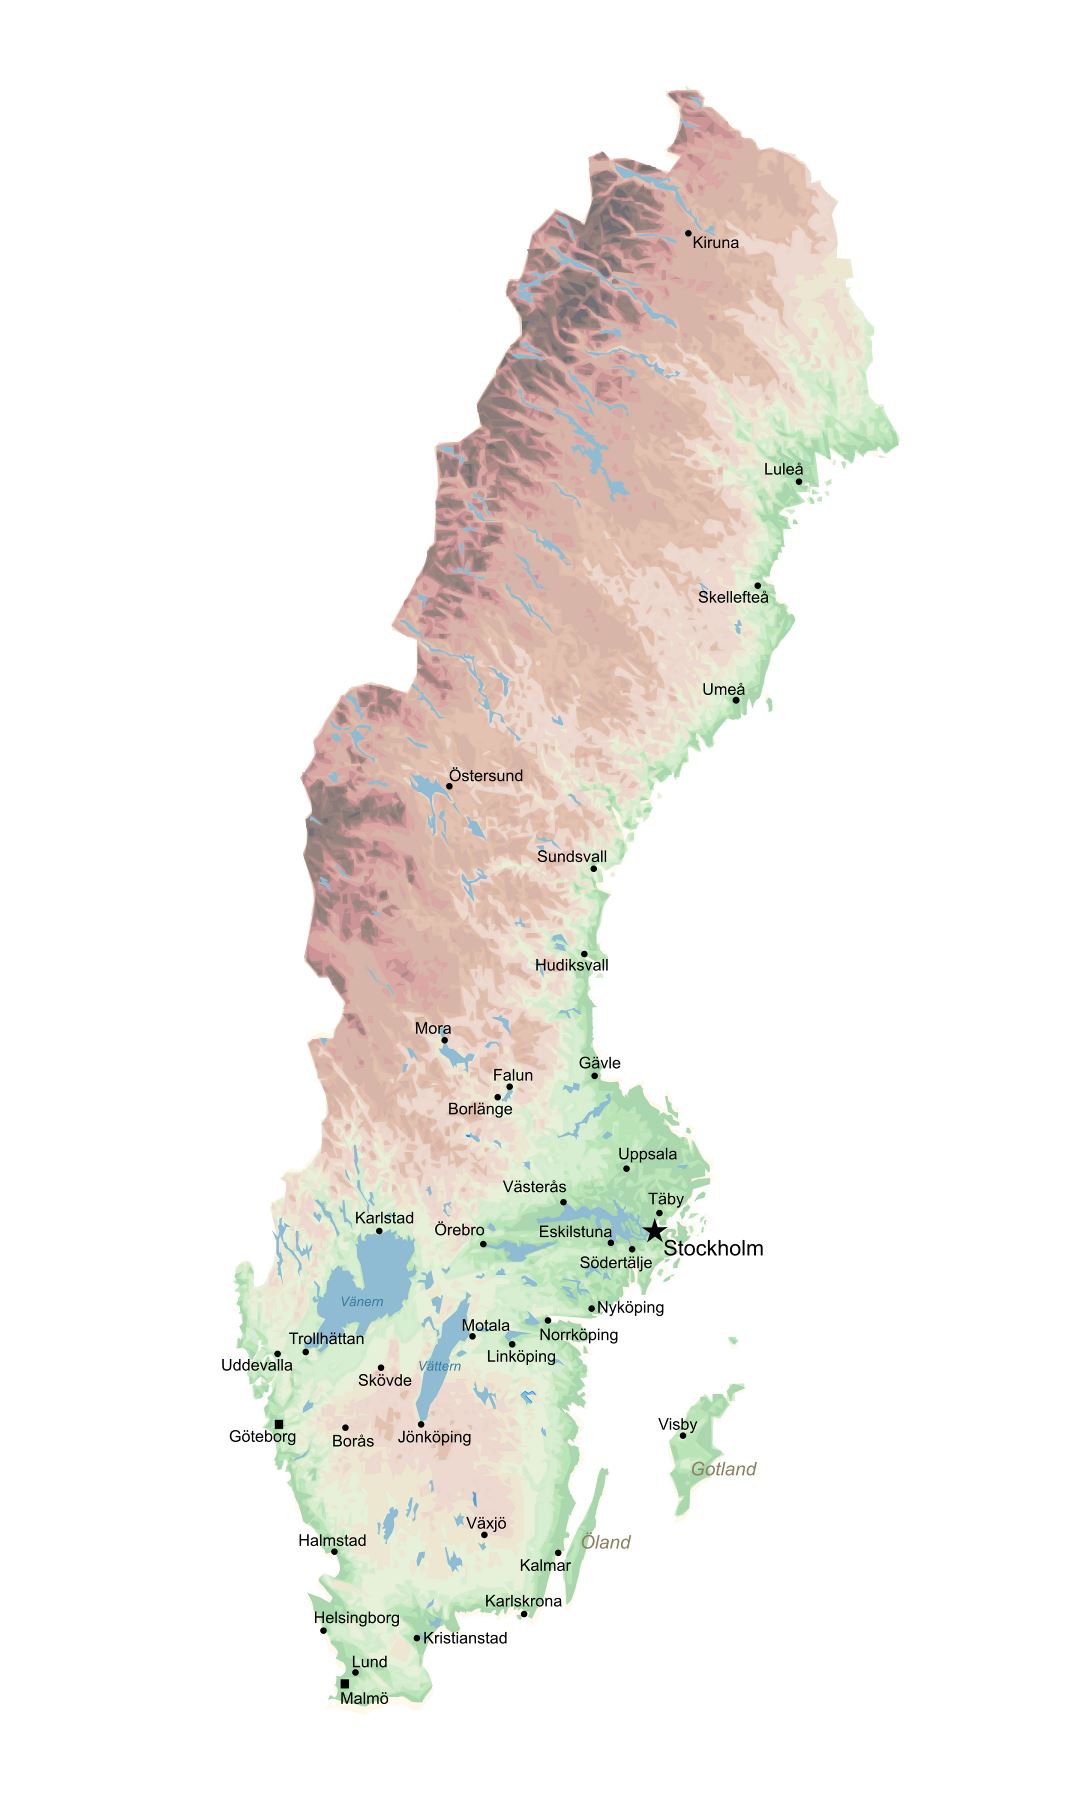 Large scale elevation map of Sweden with major cities